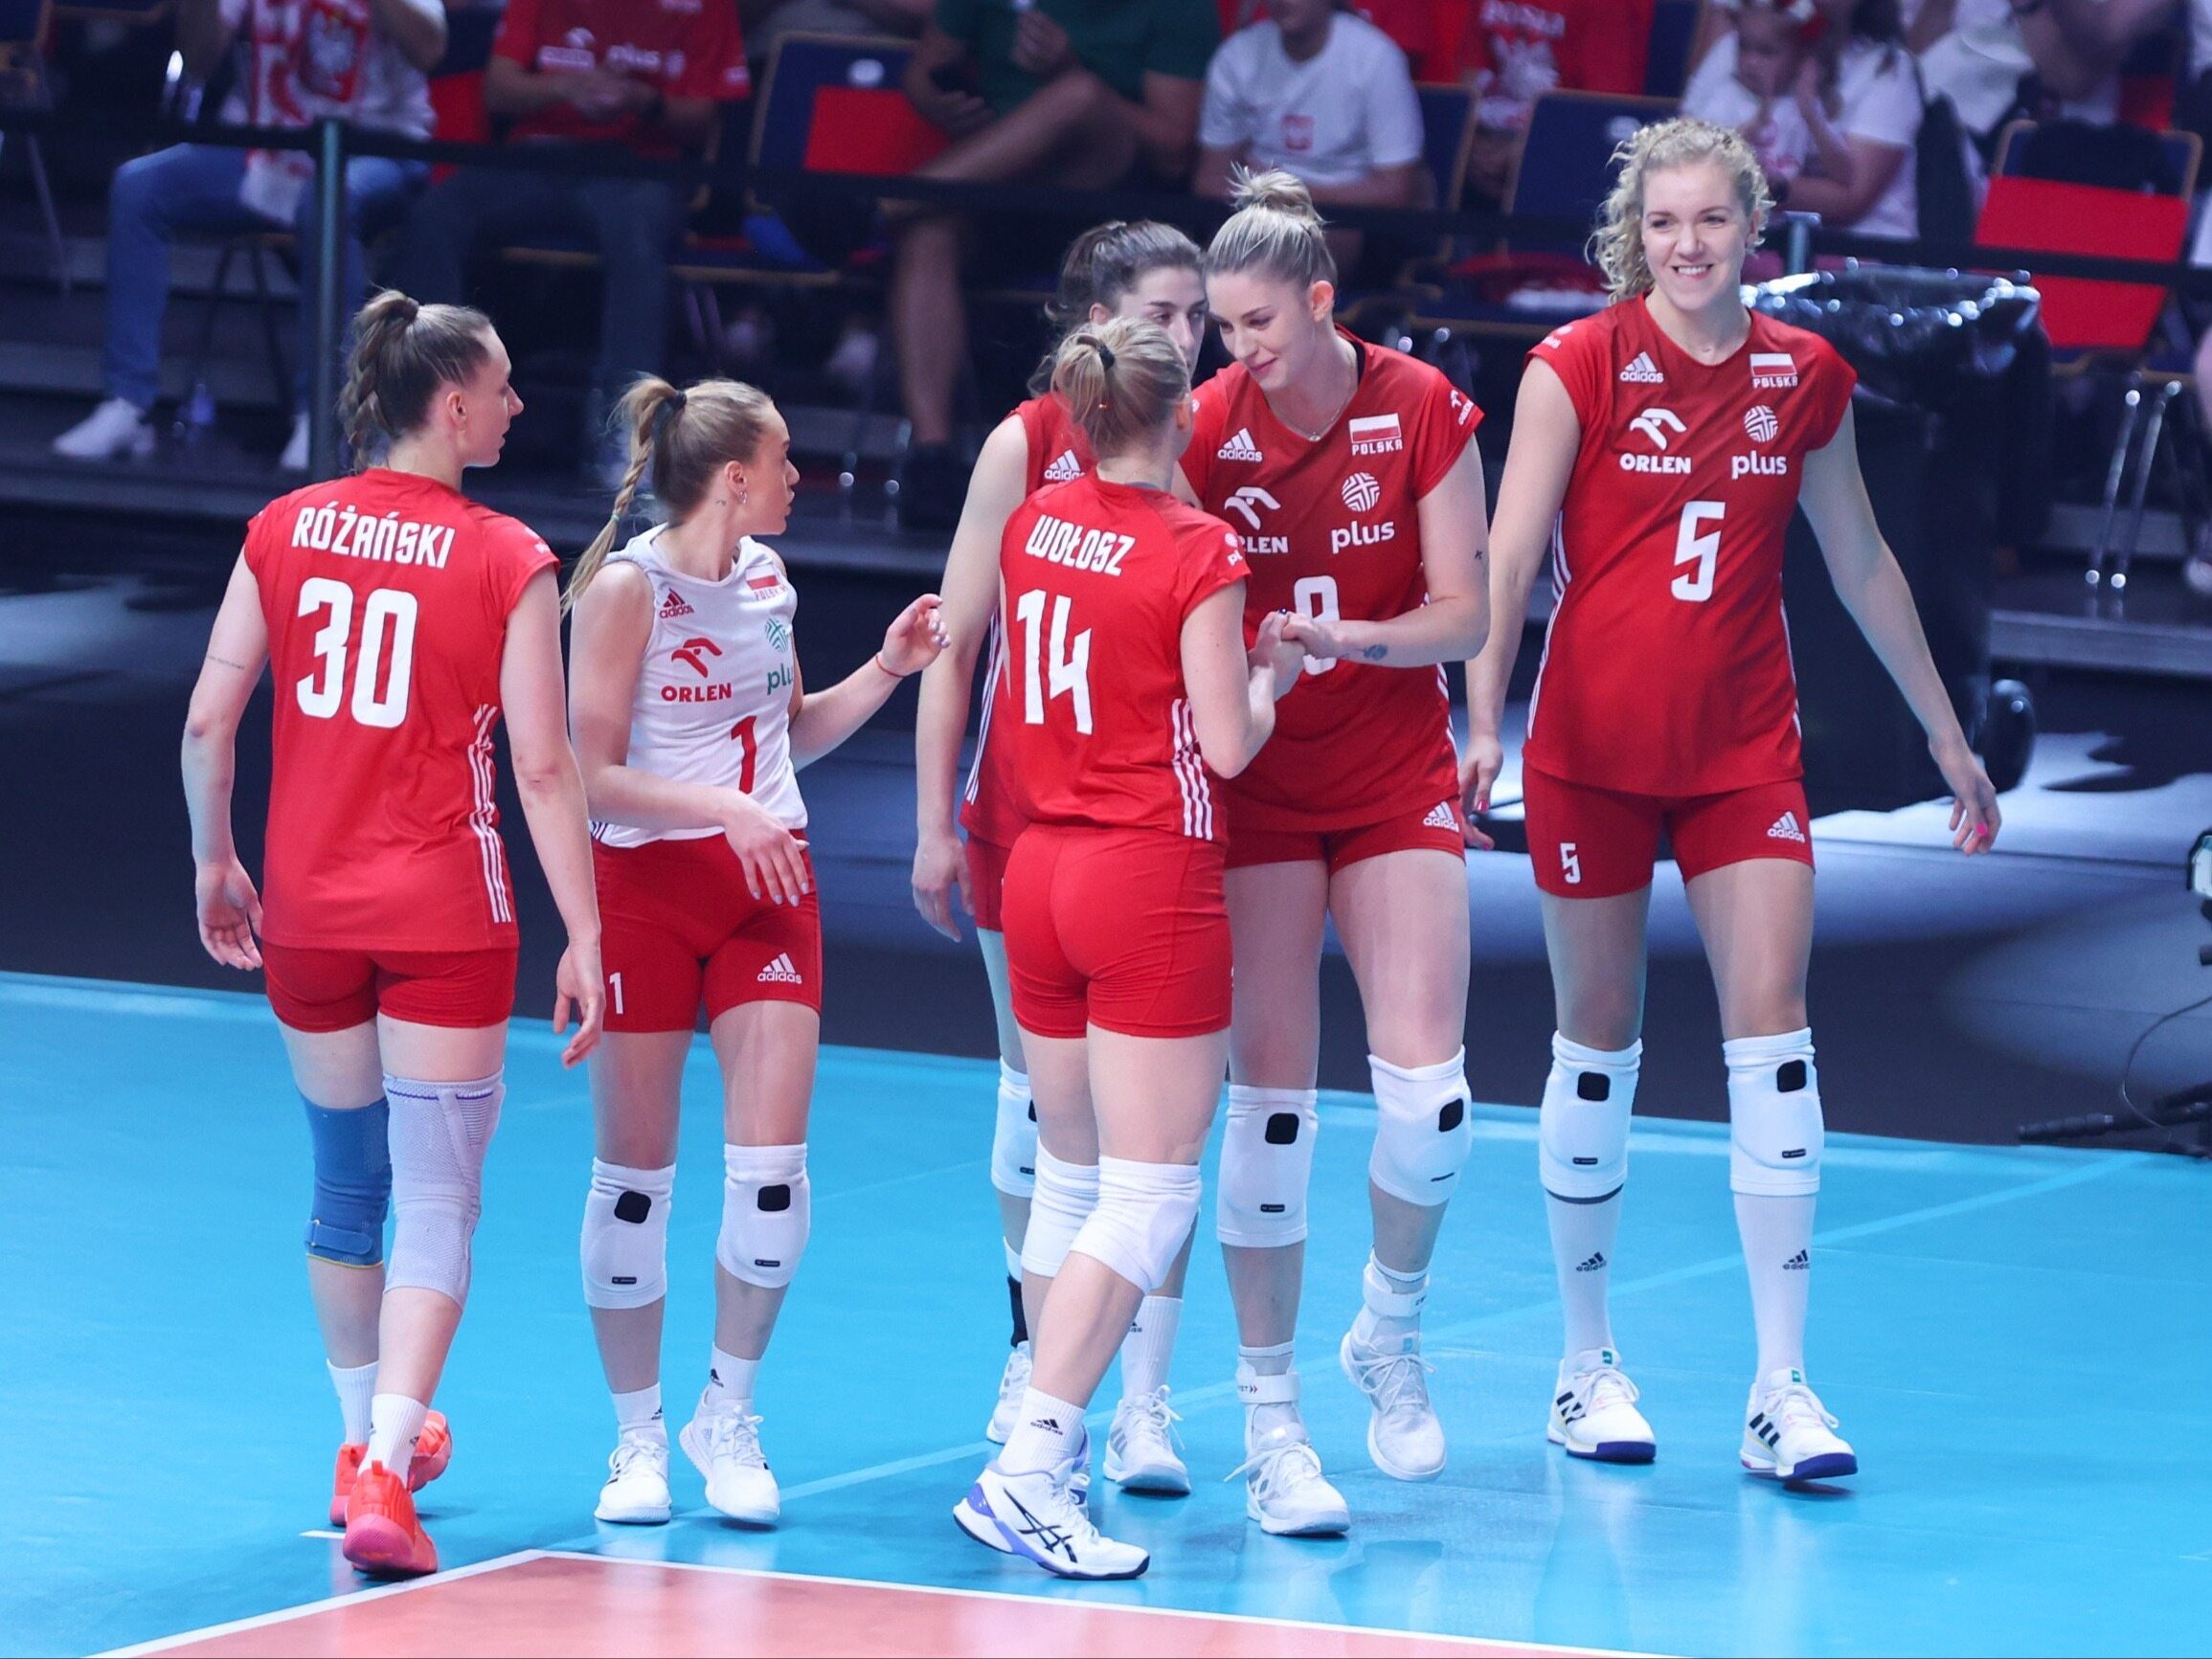 Full domination of the Polish women at the beginning of the qualifying tournament.  The Slovenian women had nothing to say